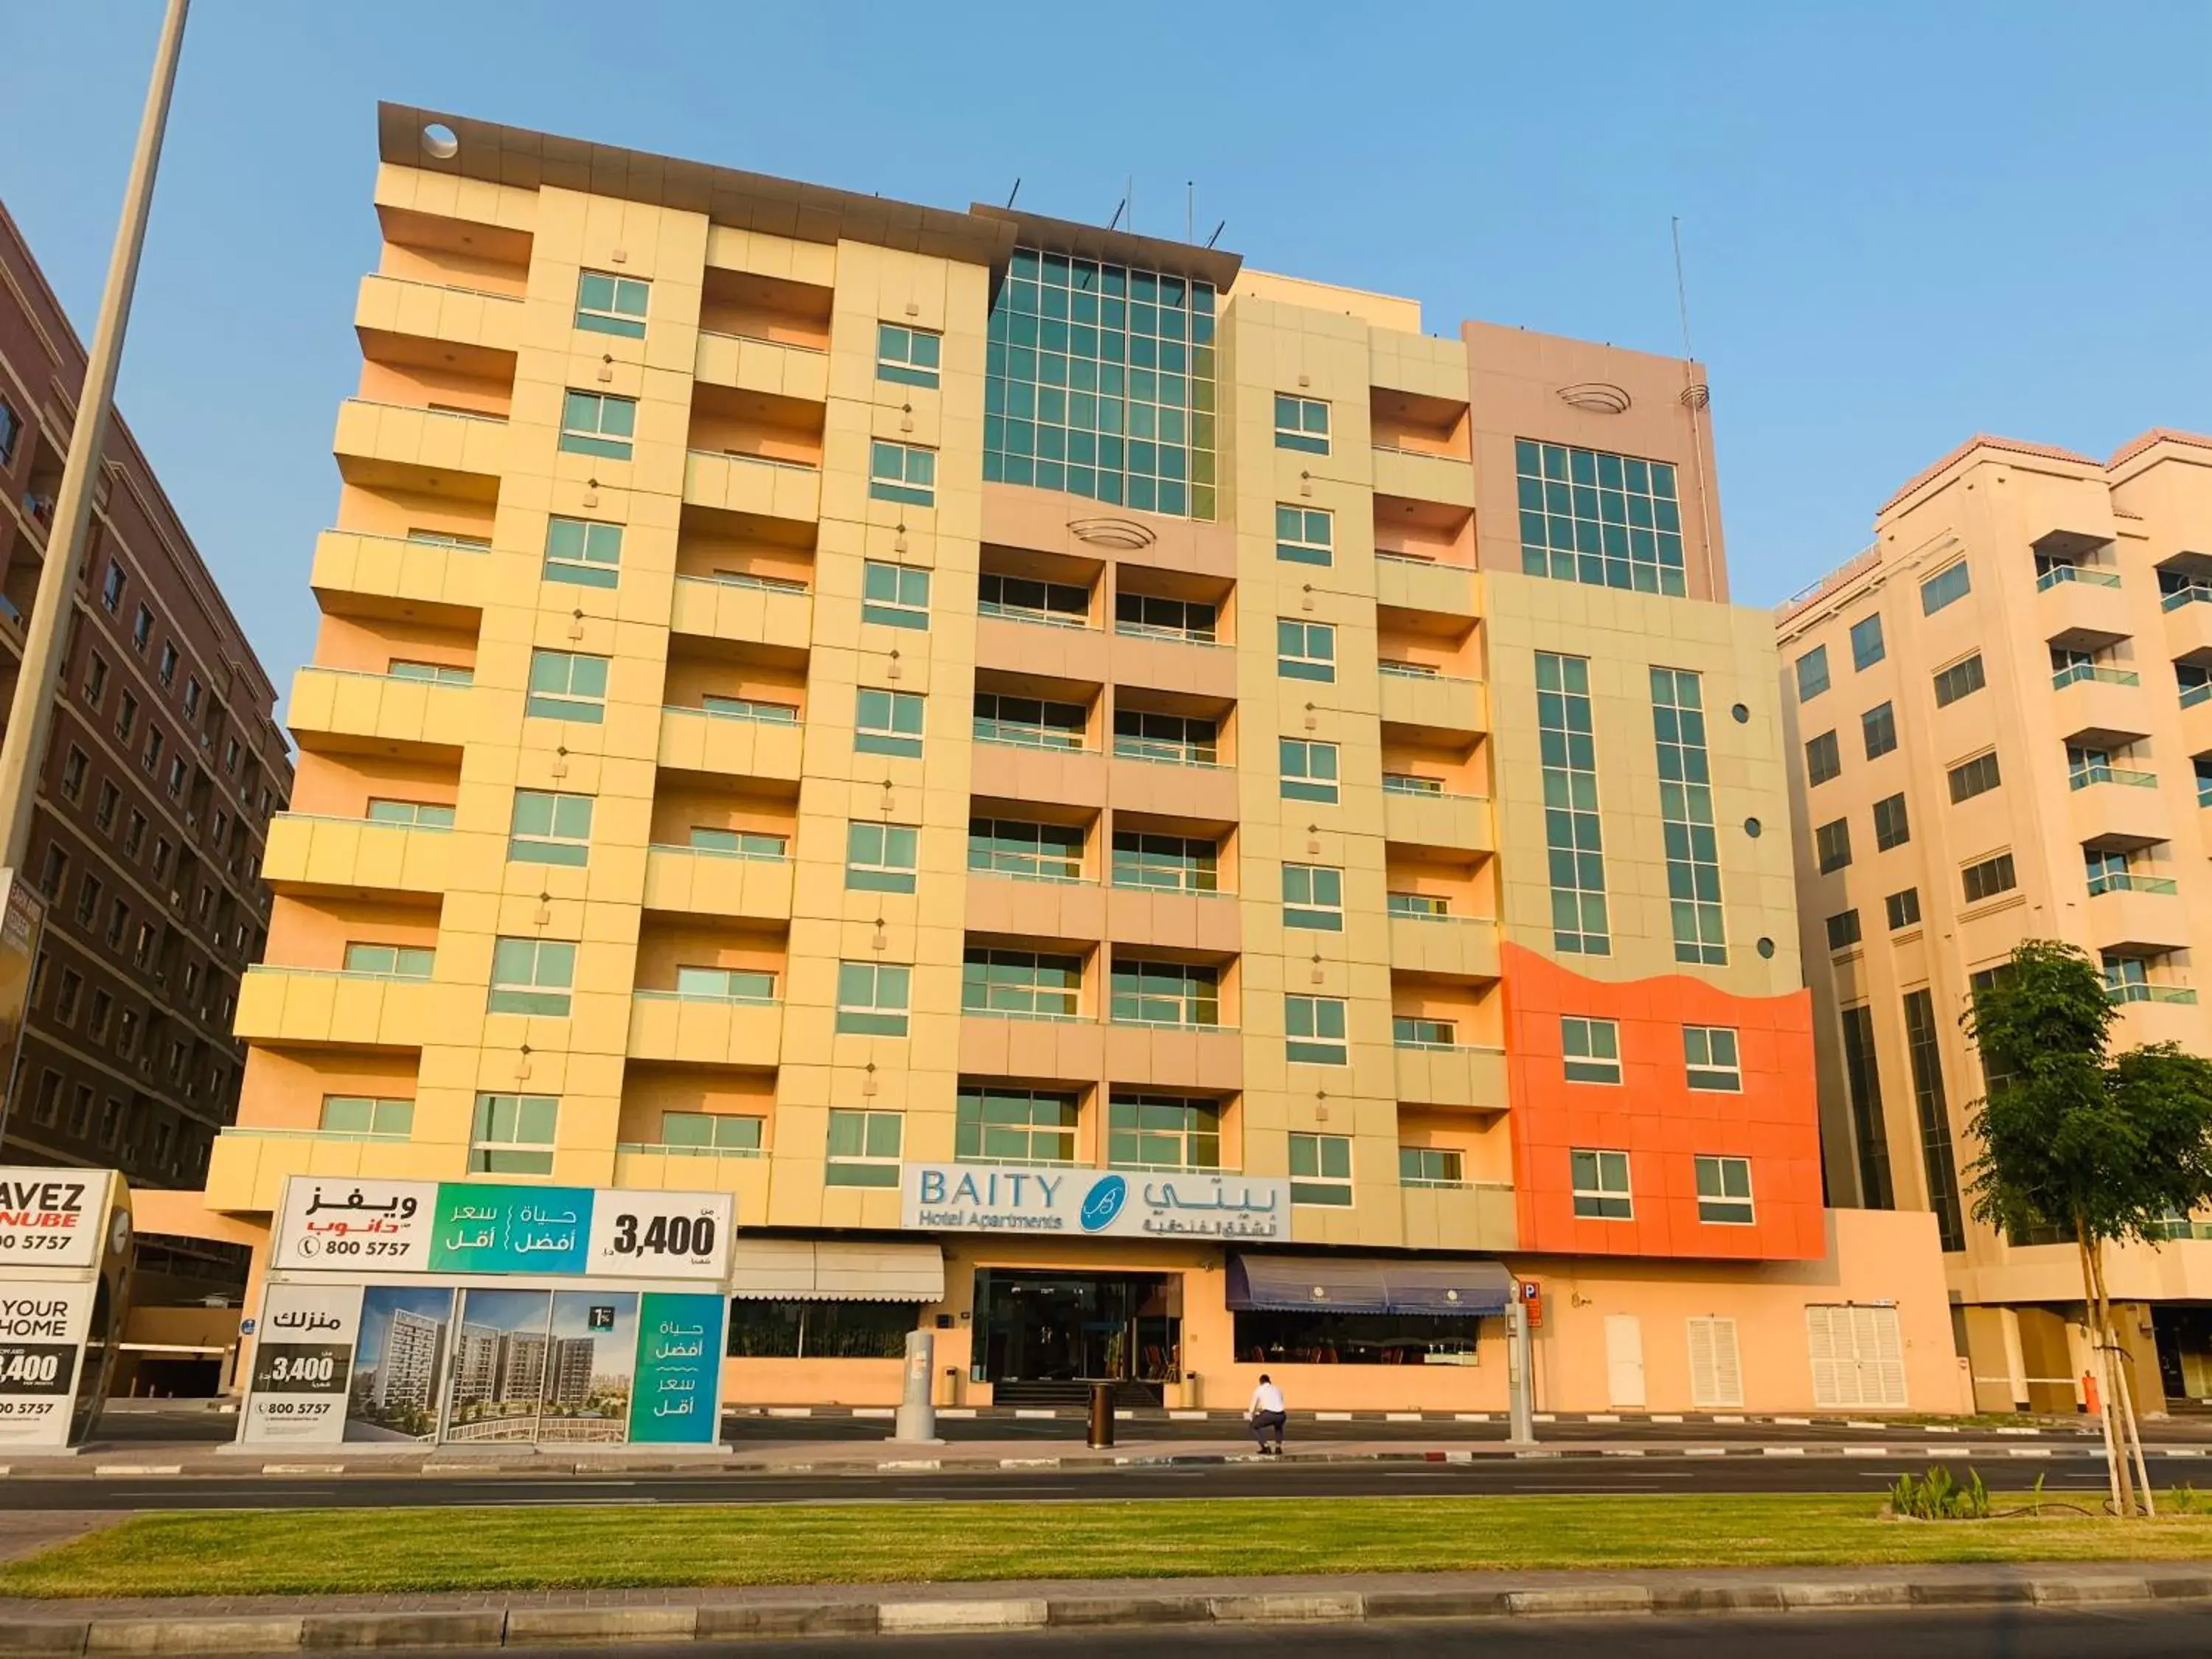 Property Building in Baity Hotel Apartments